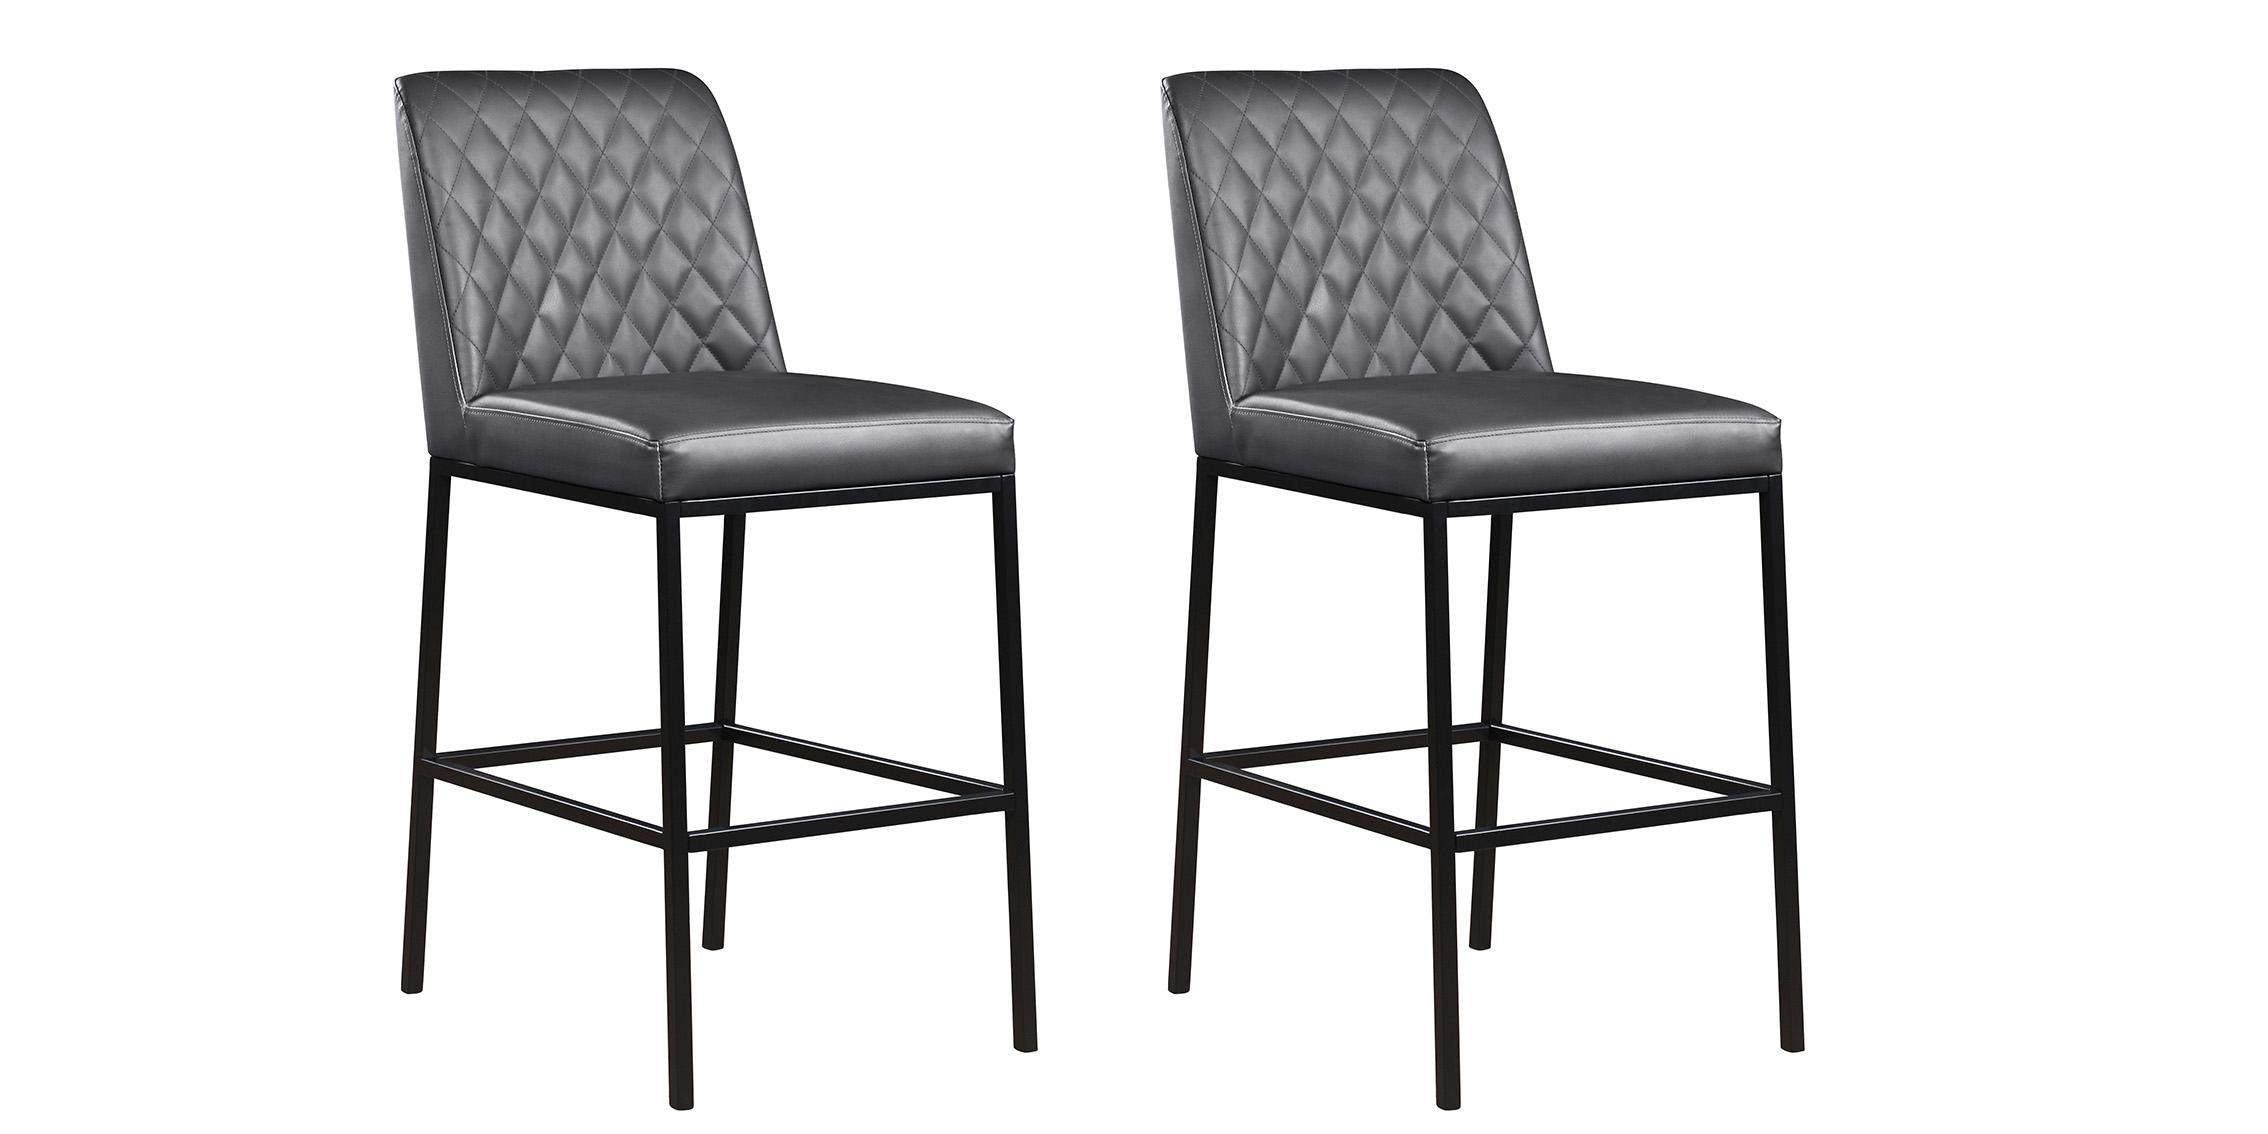 Contemporary, Modern Bar Stool Set BRYCE 919Grey-C 919Grey-C-Set-2 in Gray Faux Leather